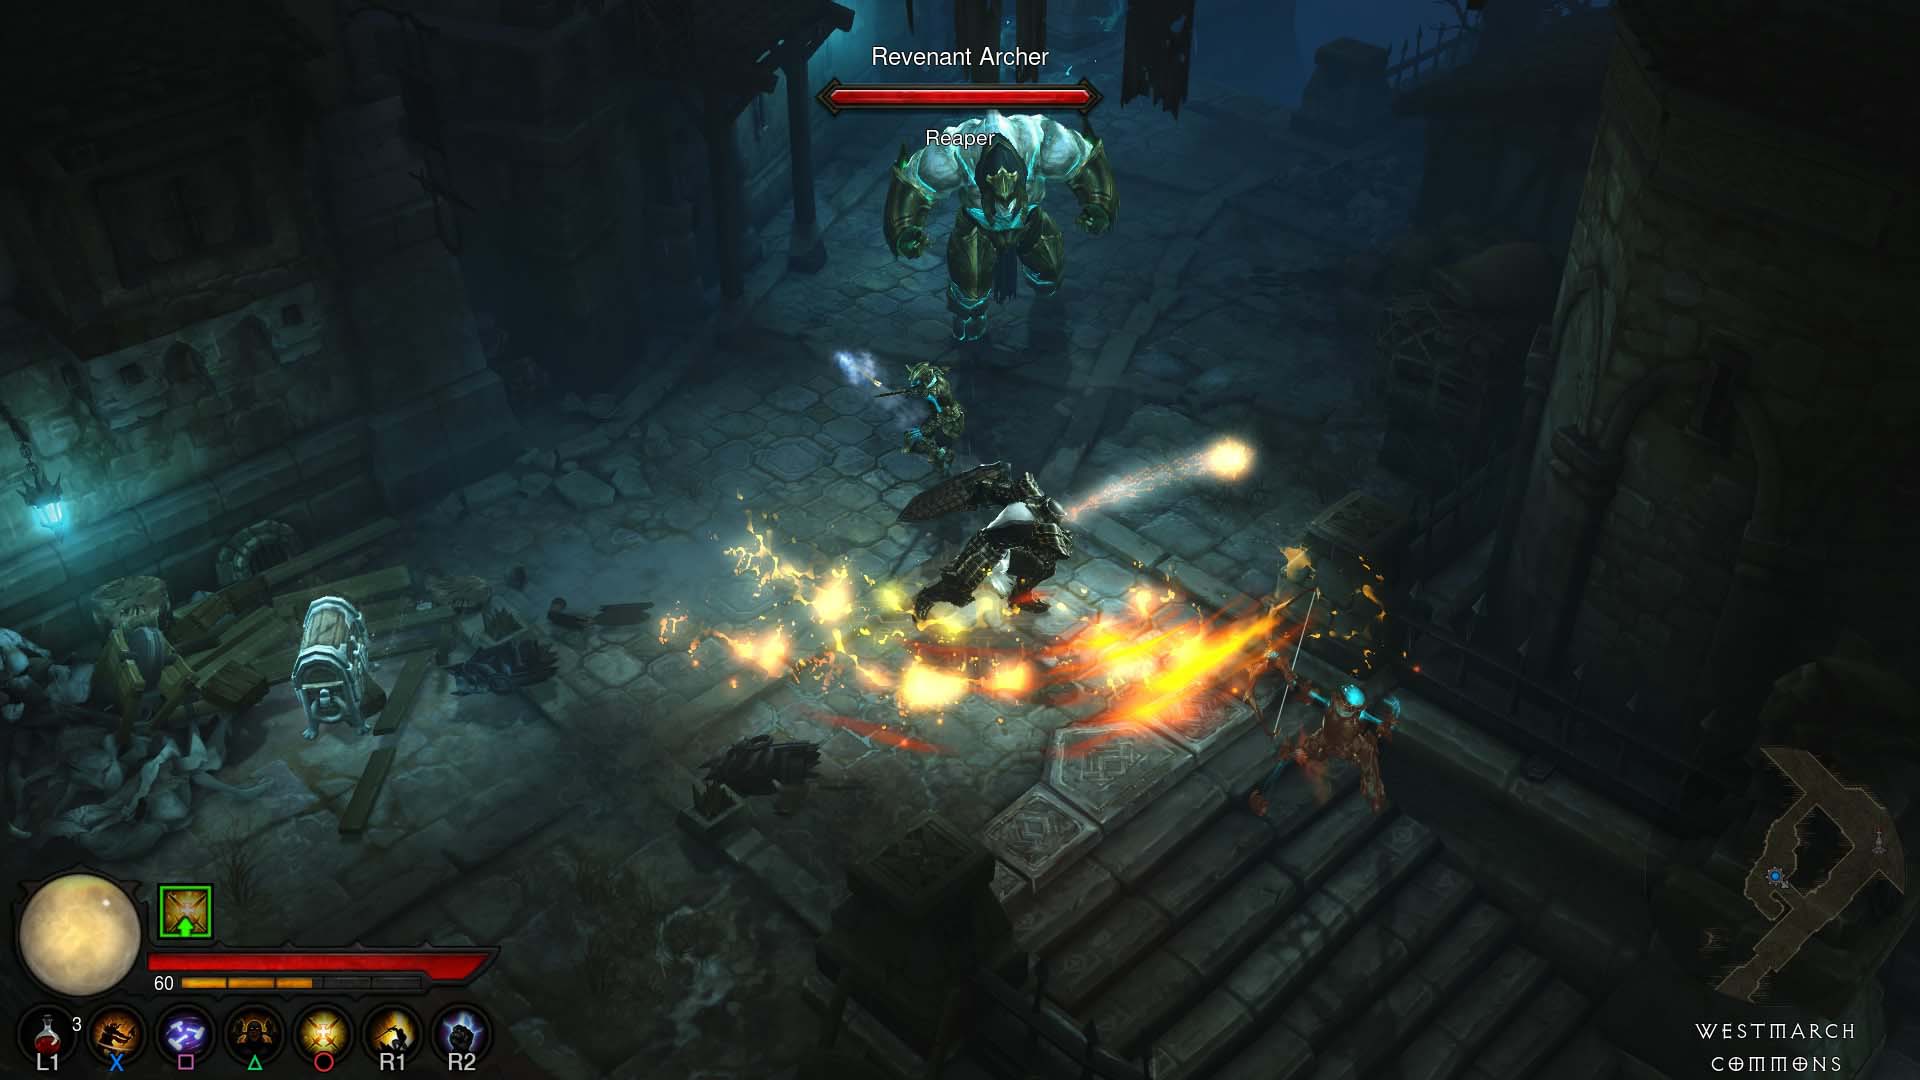 Diablo just got PS4 Pro support with its anniversary patch –